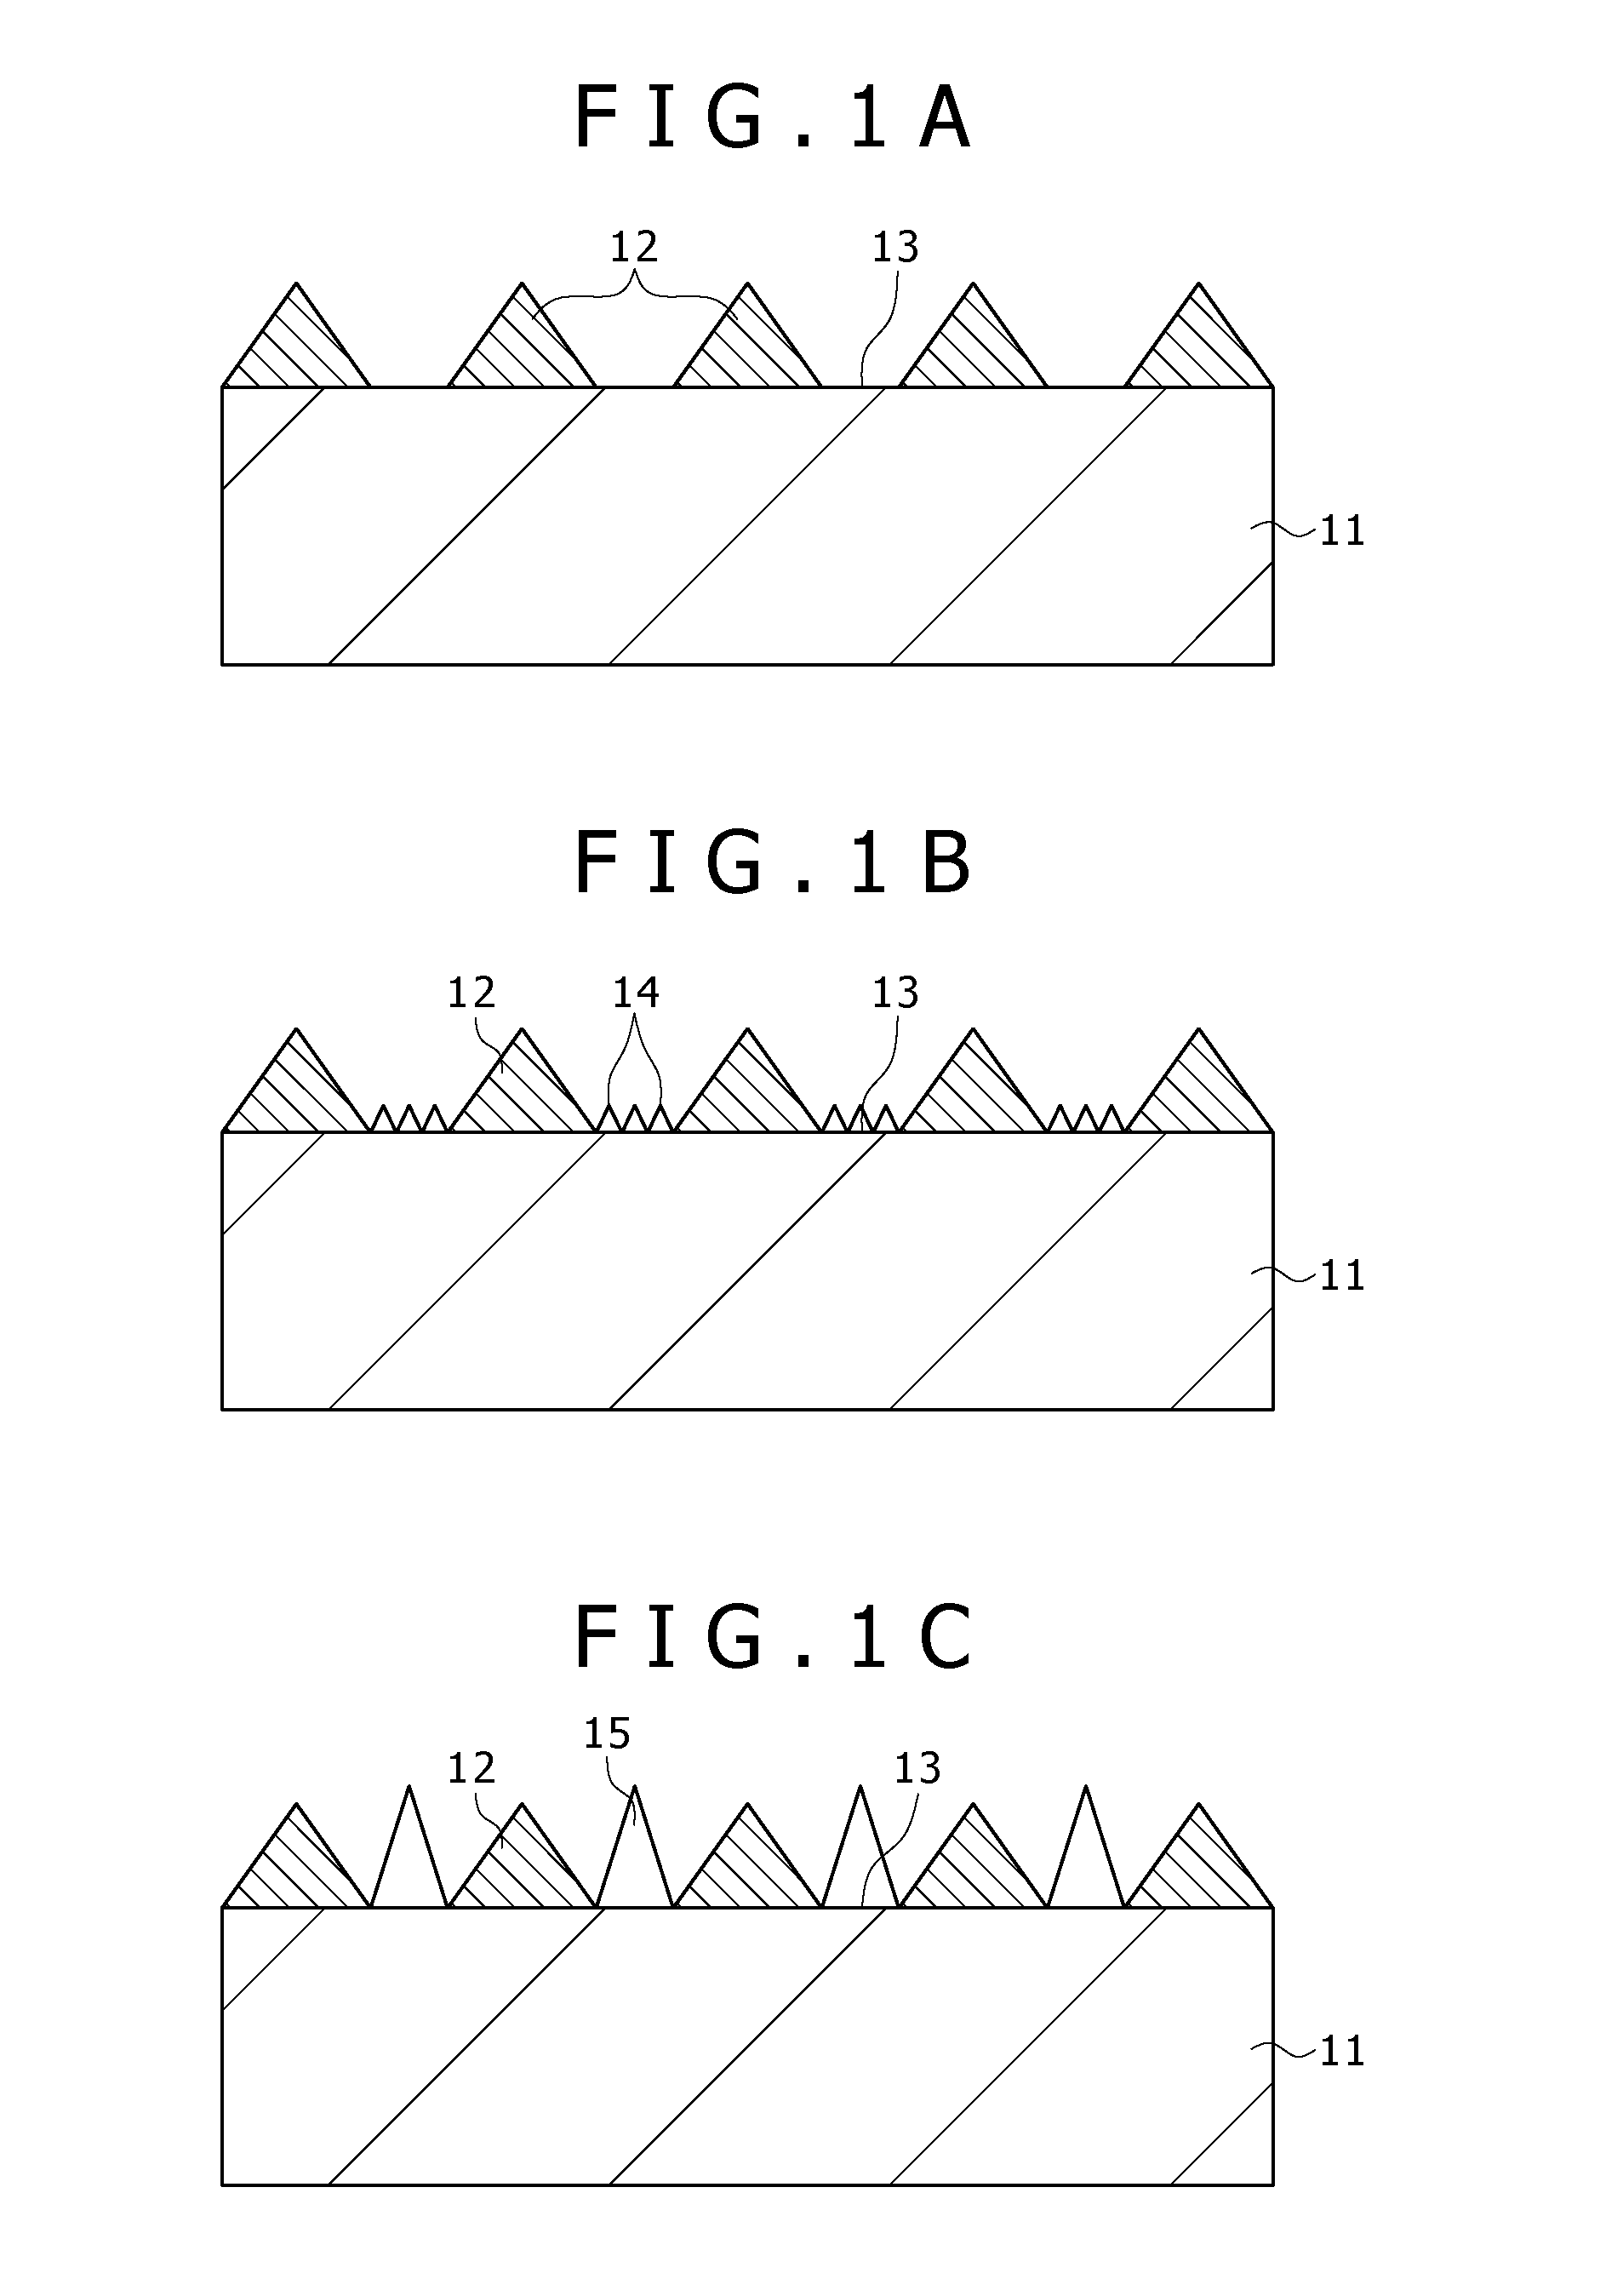 Light-emitting diode and method for manufacturing same, integrated light-emitting diode and method for manufacturing same, method for growing a nitride-based iii-v group compound semiconductor, substrate for growing a nitride-based iii-v group compound semiconductor, light source cell unit, light-emitting diode backlight, light-emitting diode illuminating device, light-emitting diode display and electronic instrument, electronic device and method for manufacturing the same